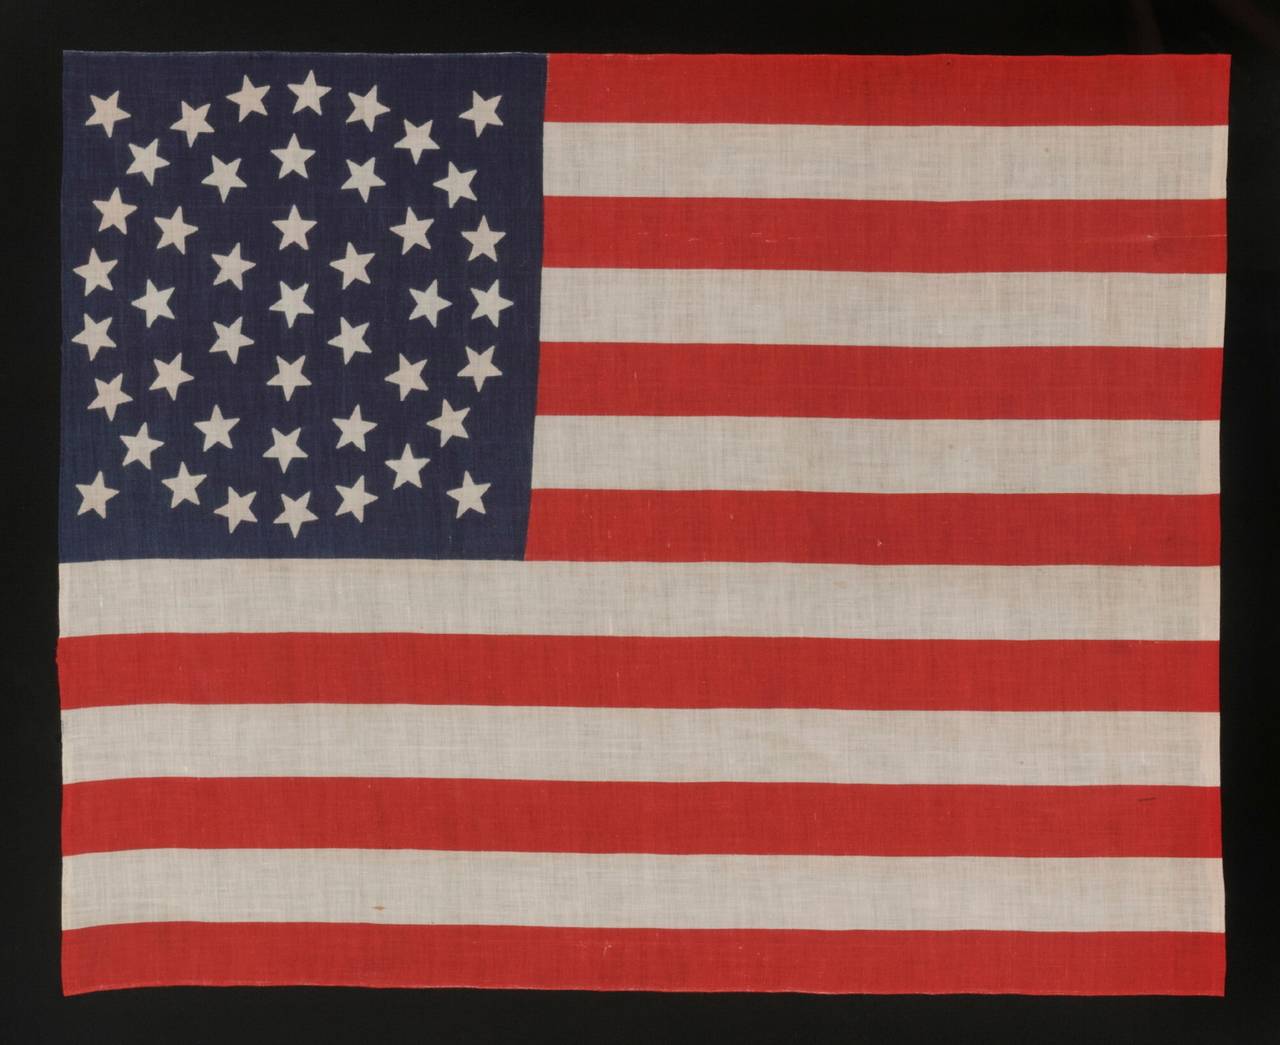 44 stars on a large-scale parade flag, Wyoming Statehood, 1890-1896, rare in this period with a wreath configuration:

44 star American parade flag with triple wreath medallion star configuration, printed on cotton. This highly desired star